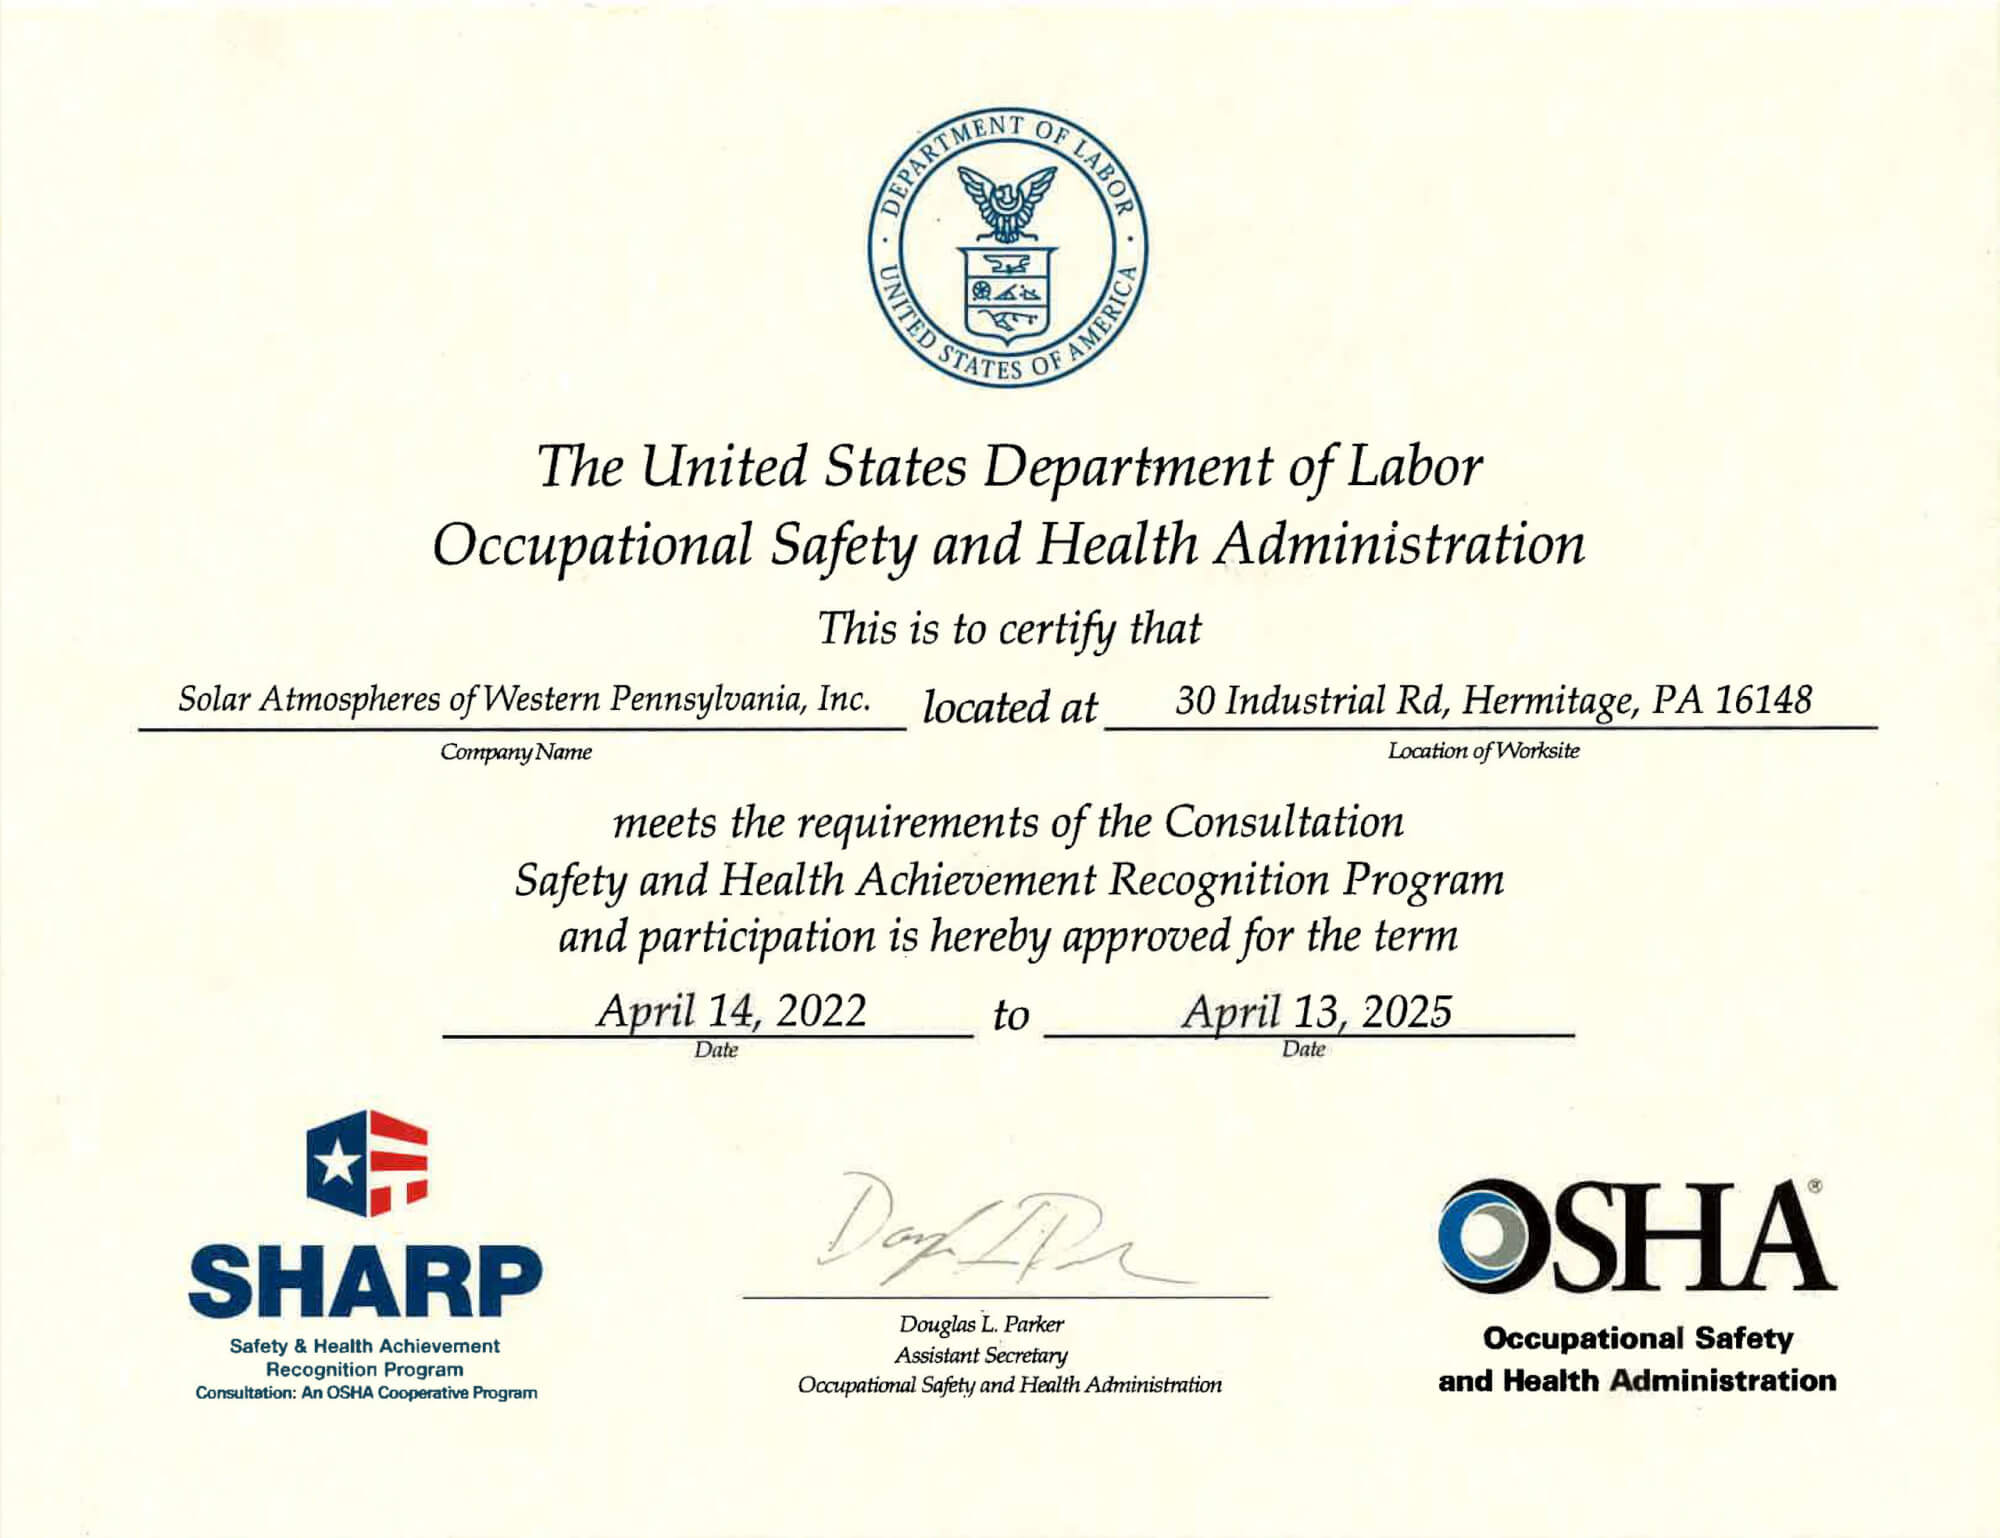 Solar Atmospheres of Western PA SHARP Certification